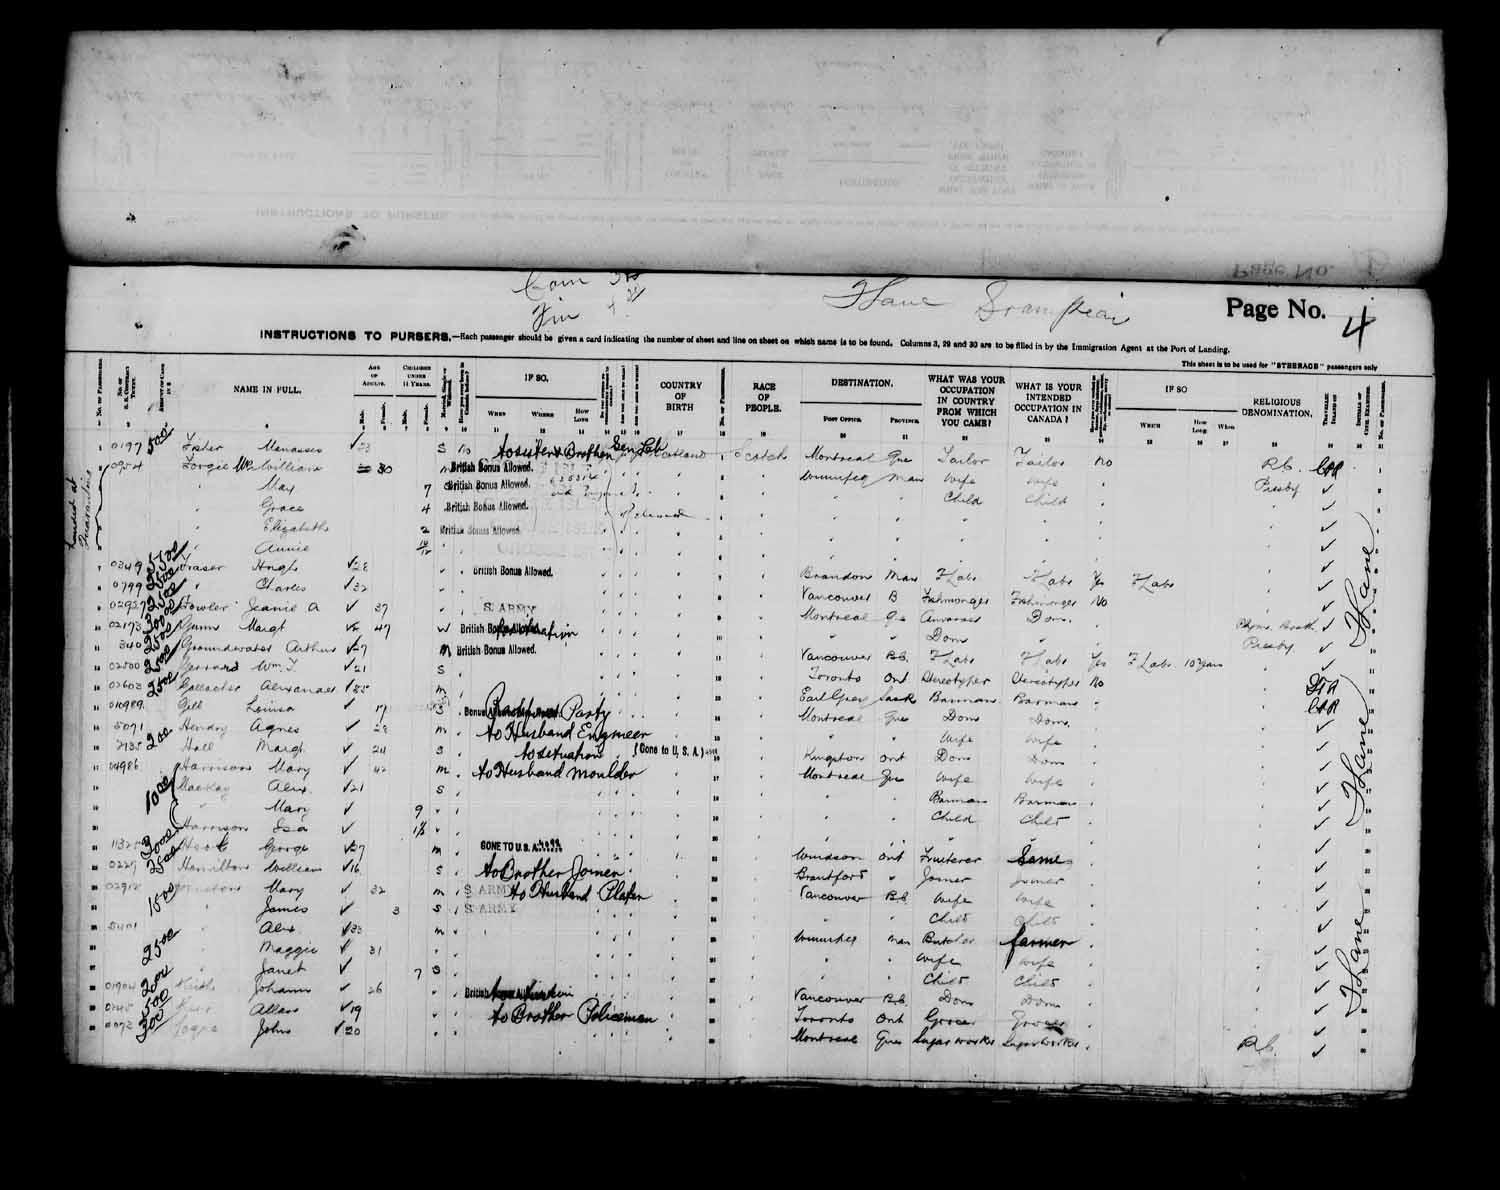 Digitized page of Passenger Lists for Image No.: e003566523